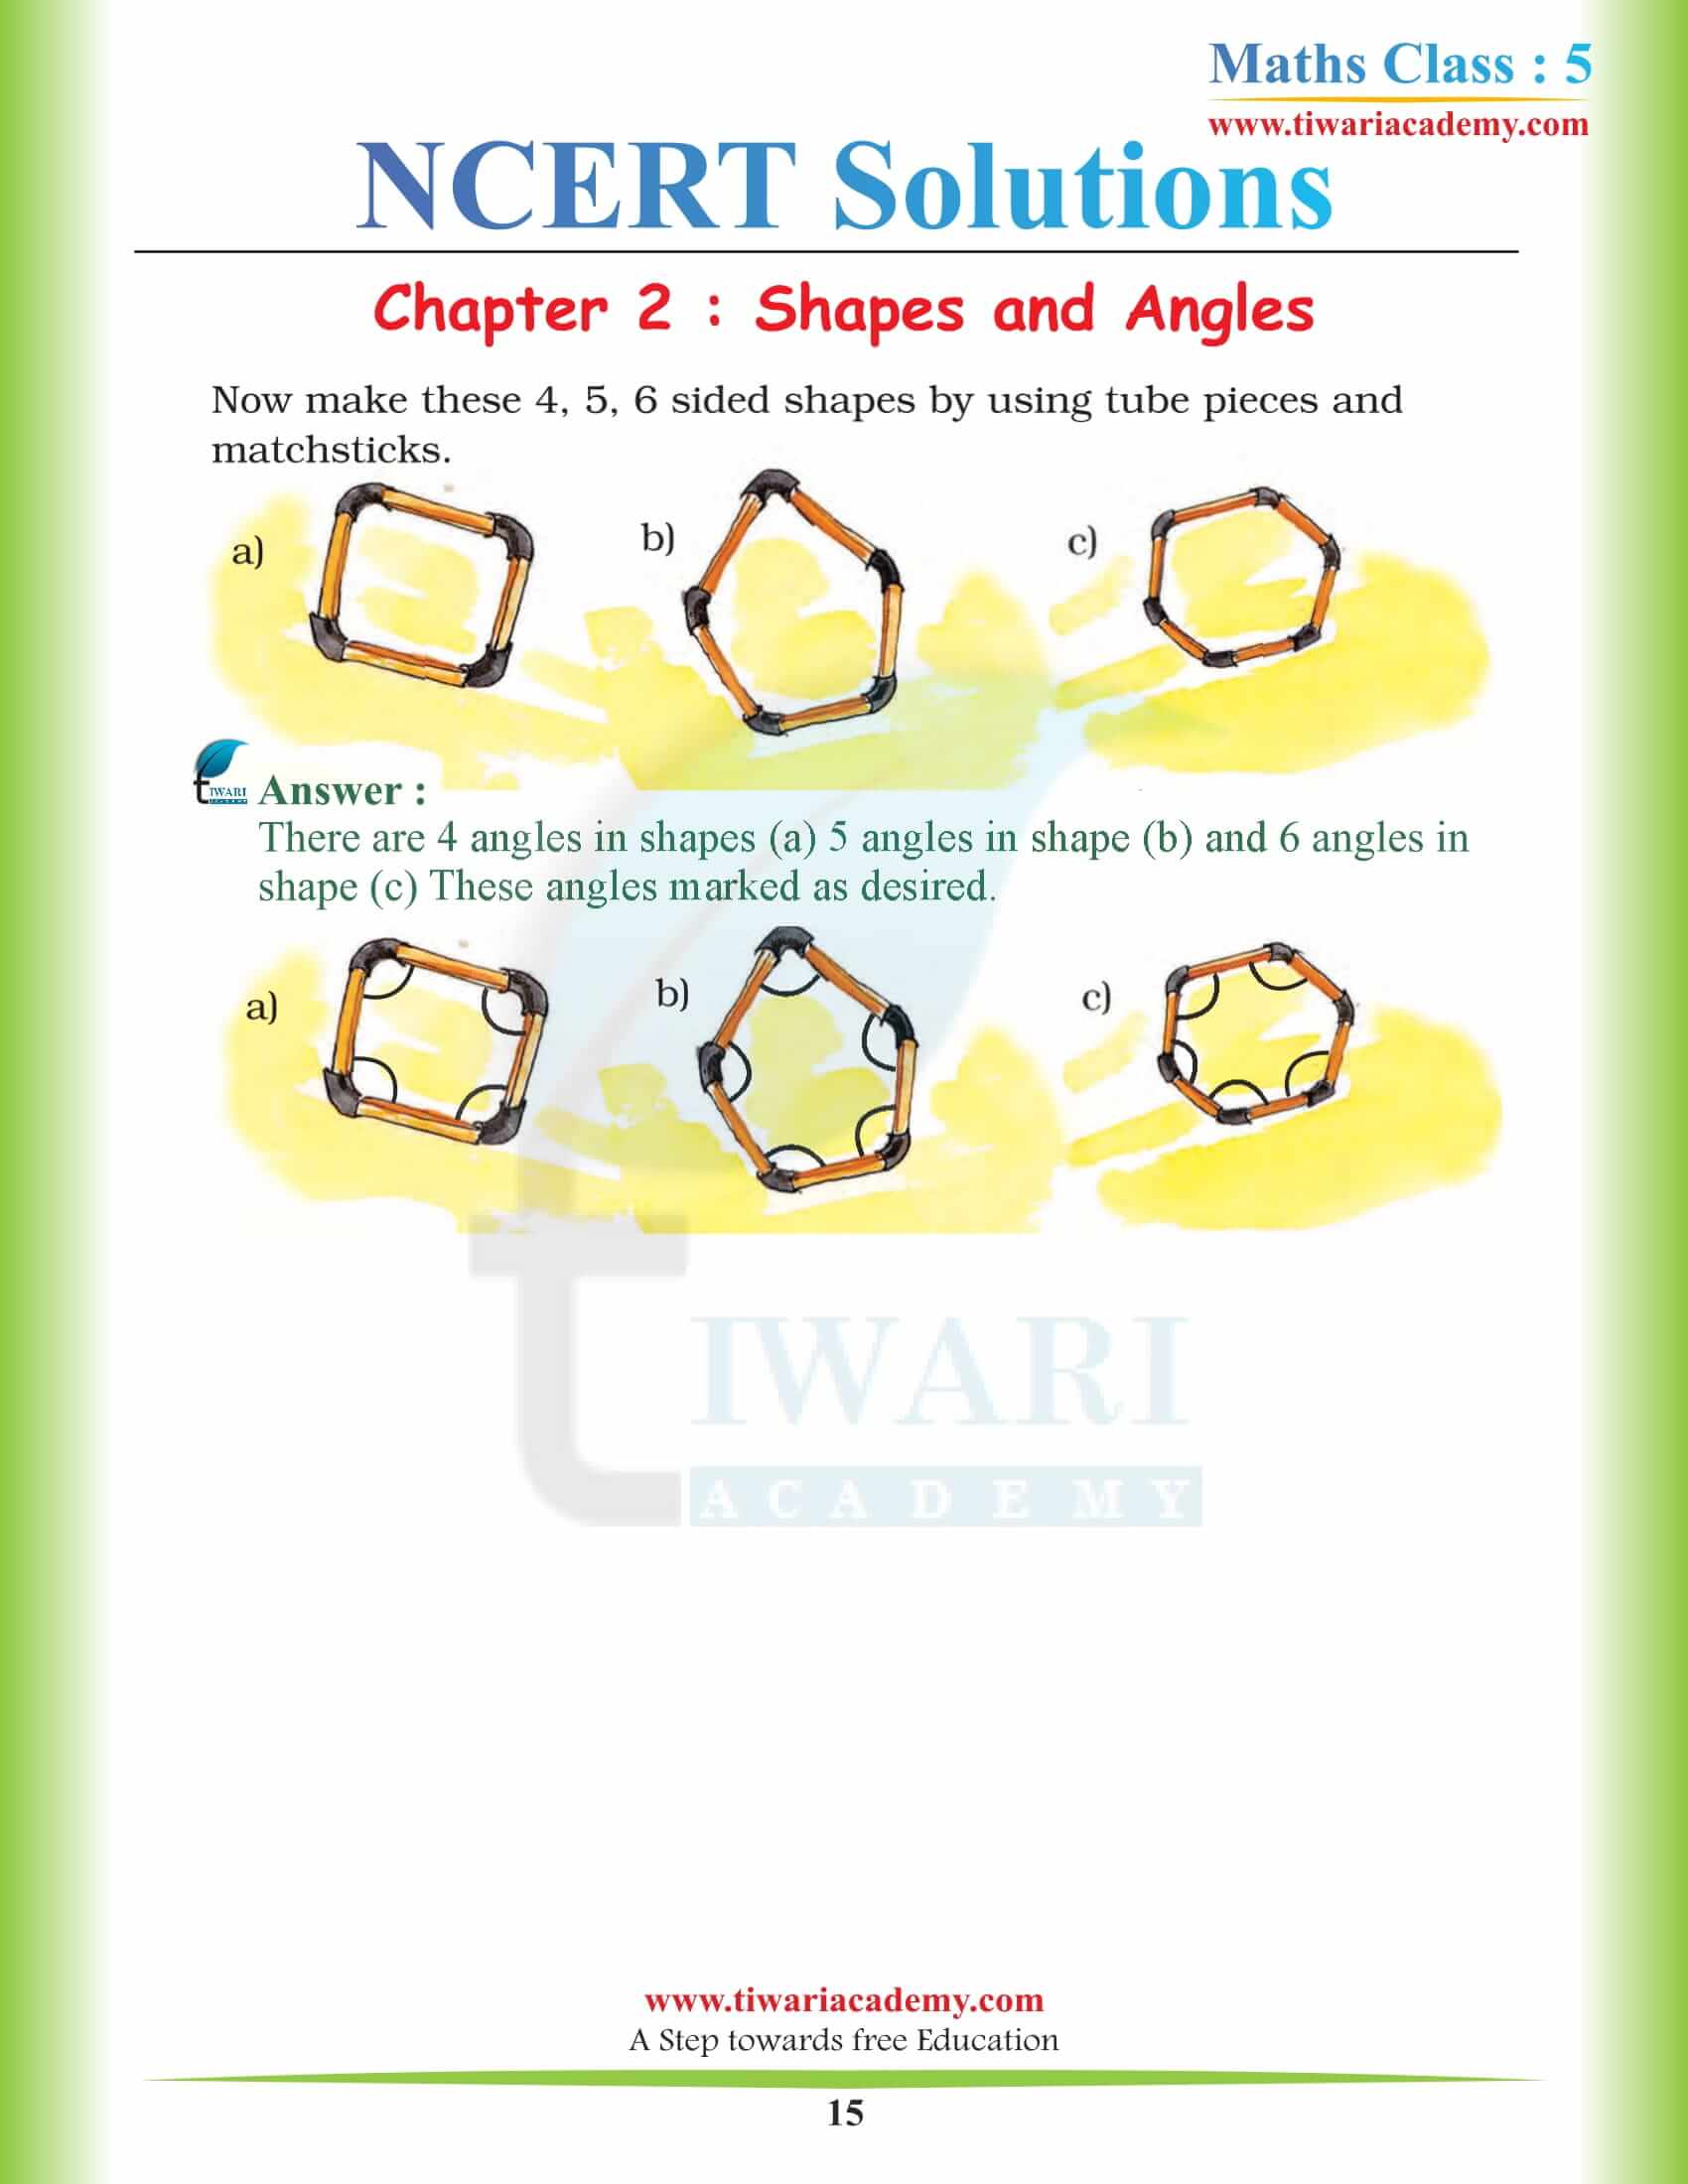 Class 5 Maths Chapter 2 all answers free